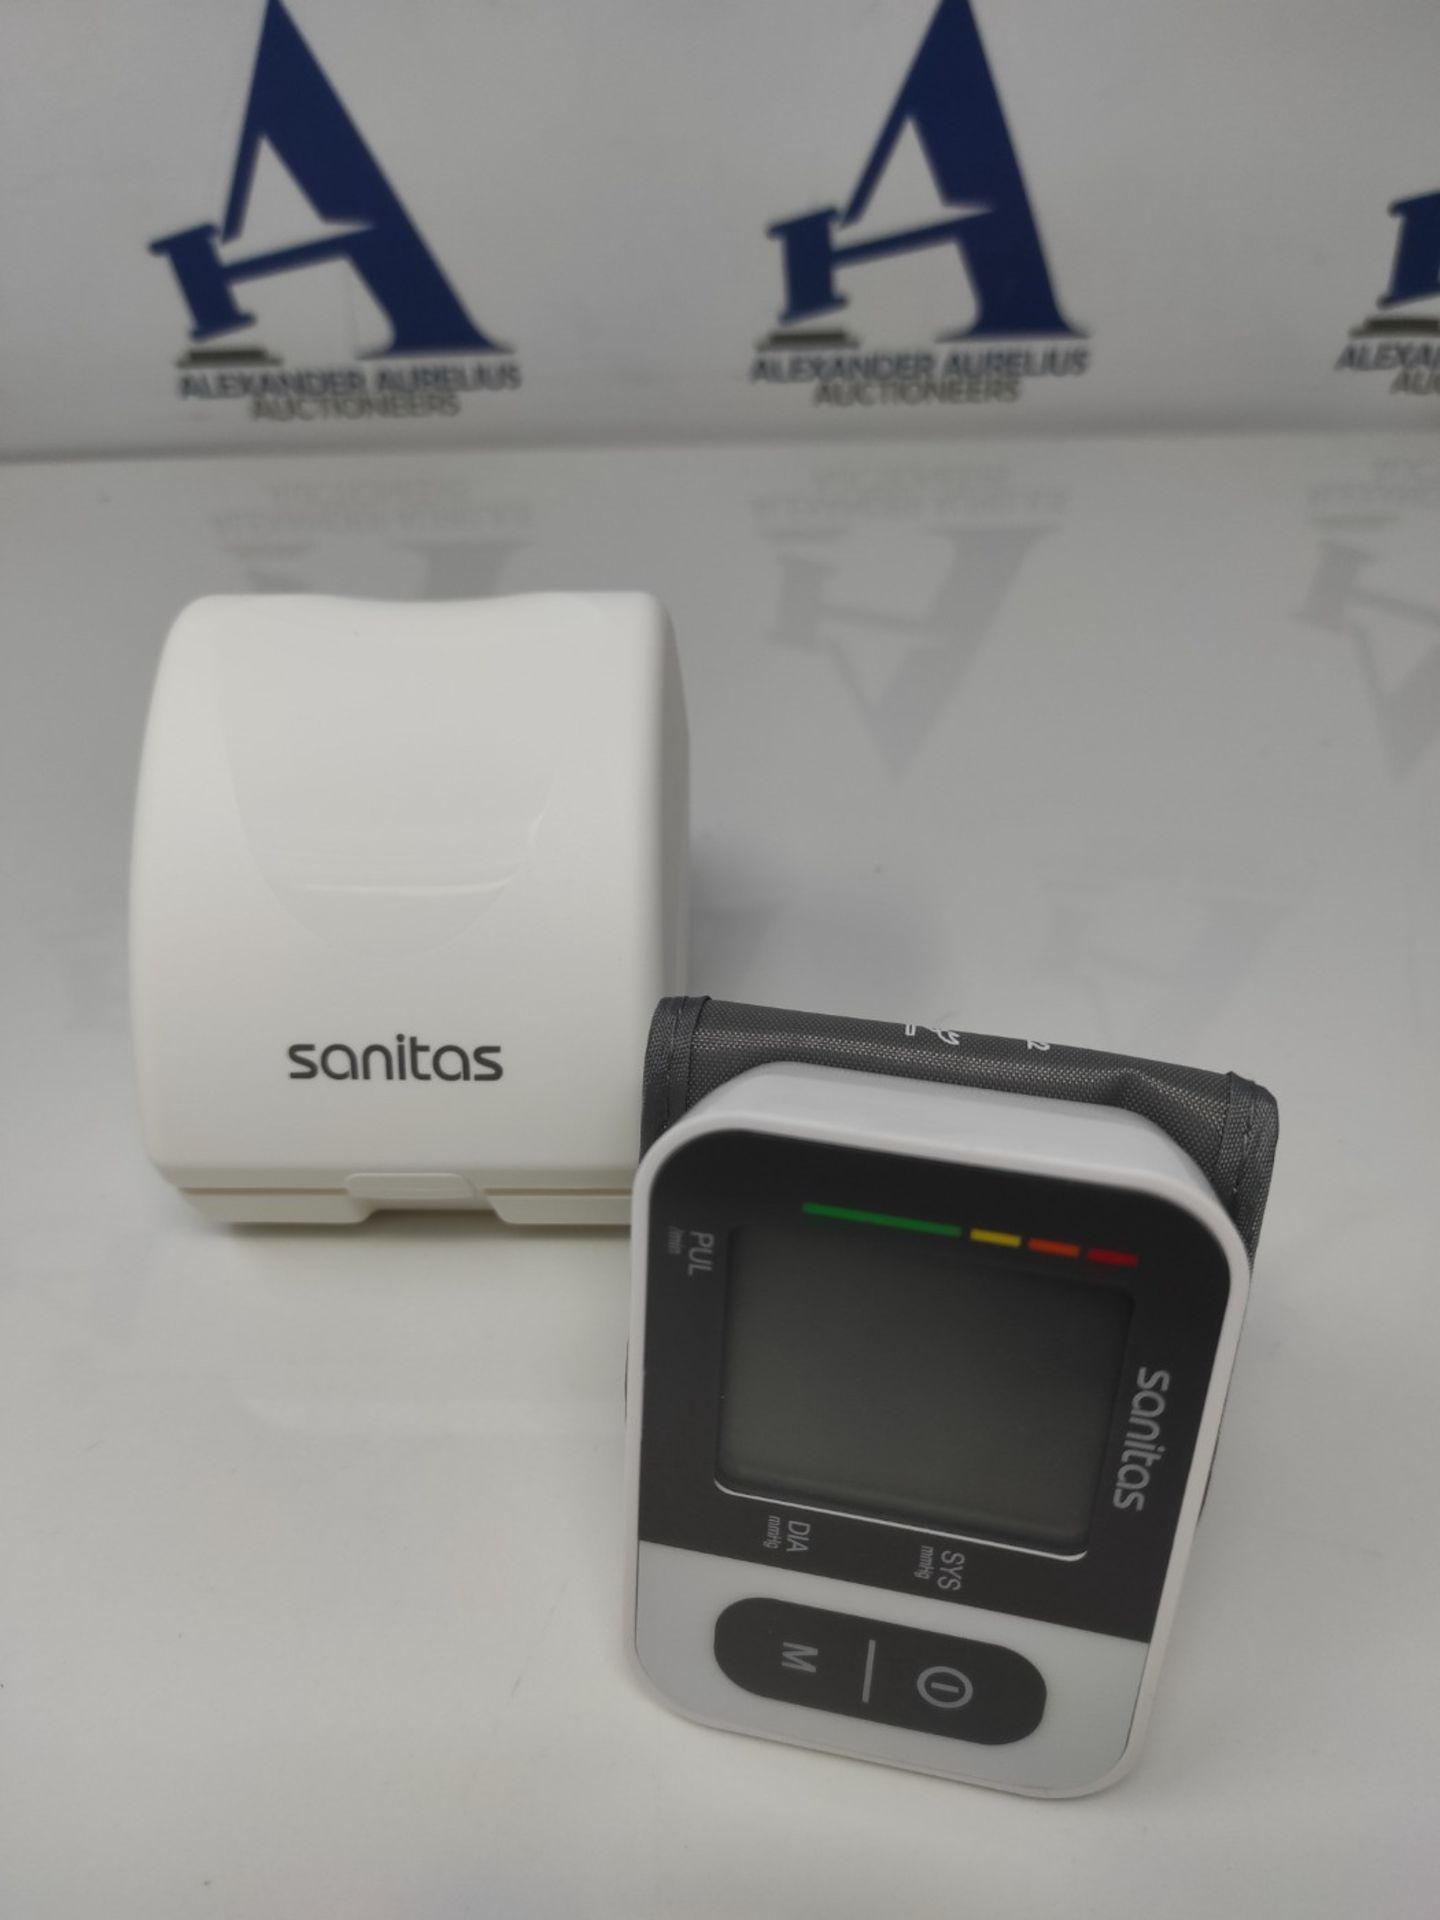 Sanitas SBC 15 wrist blood pressure monitor, fully automatic blood pressure and pulse - Image 3 of 6